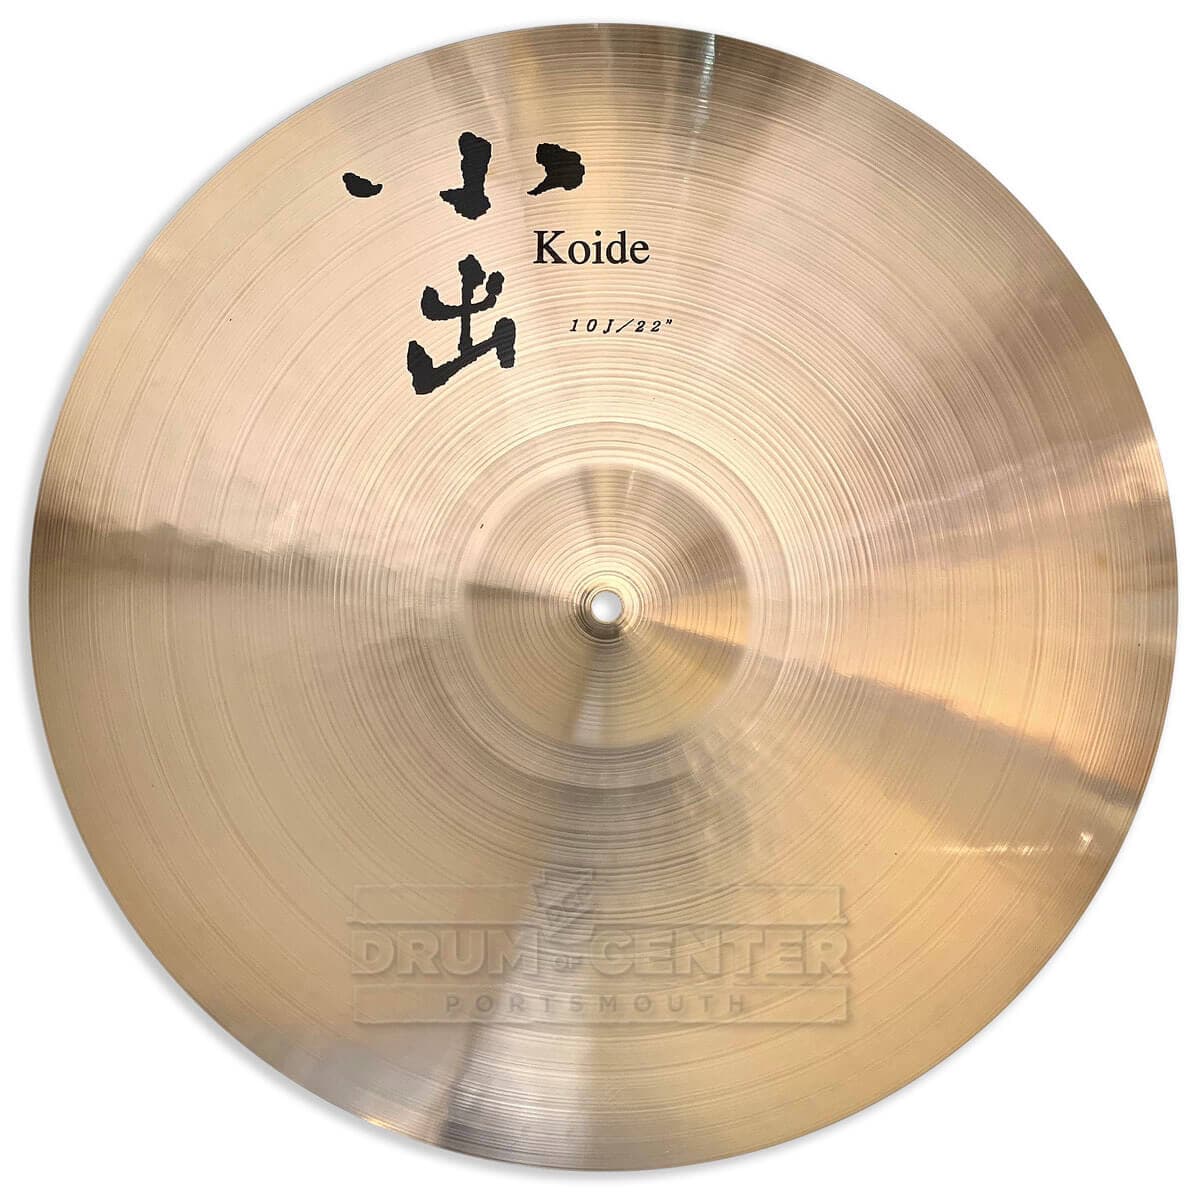 Koide 10J Traditional Ride Cymbal 22" 2486 grams